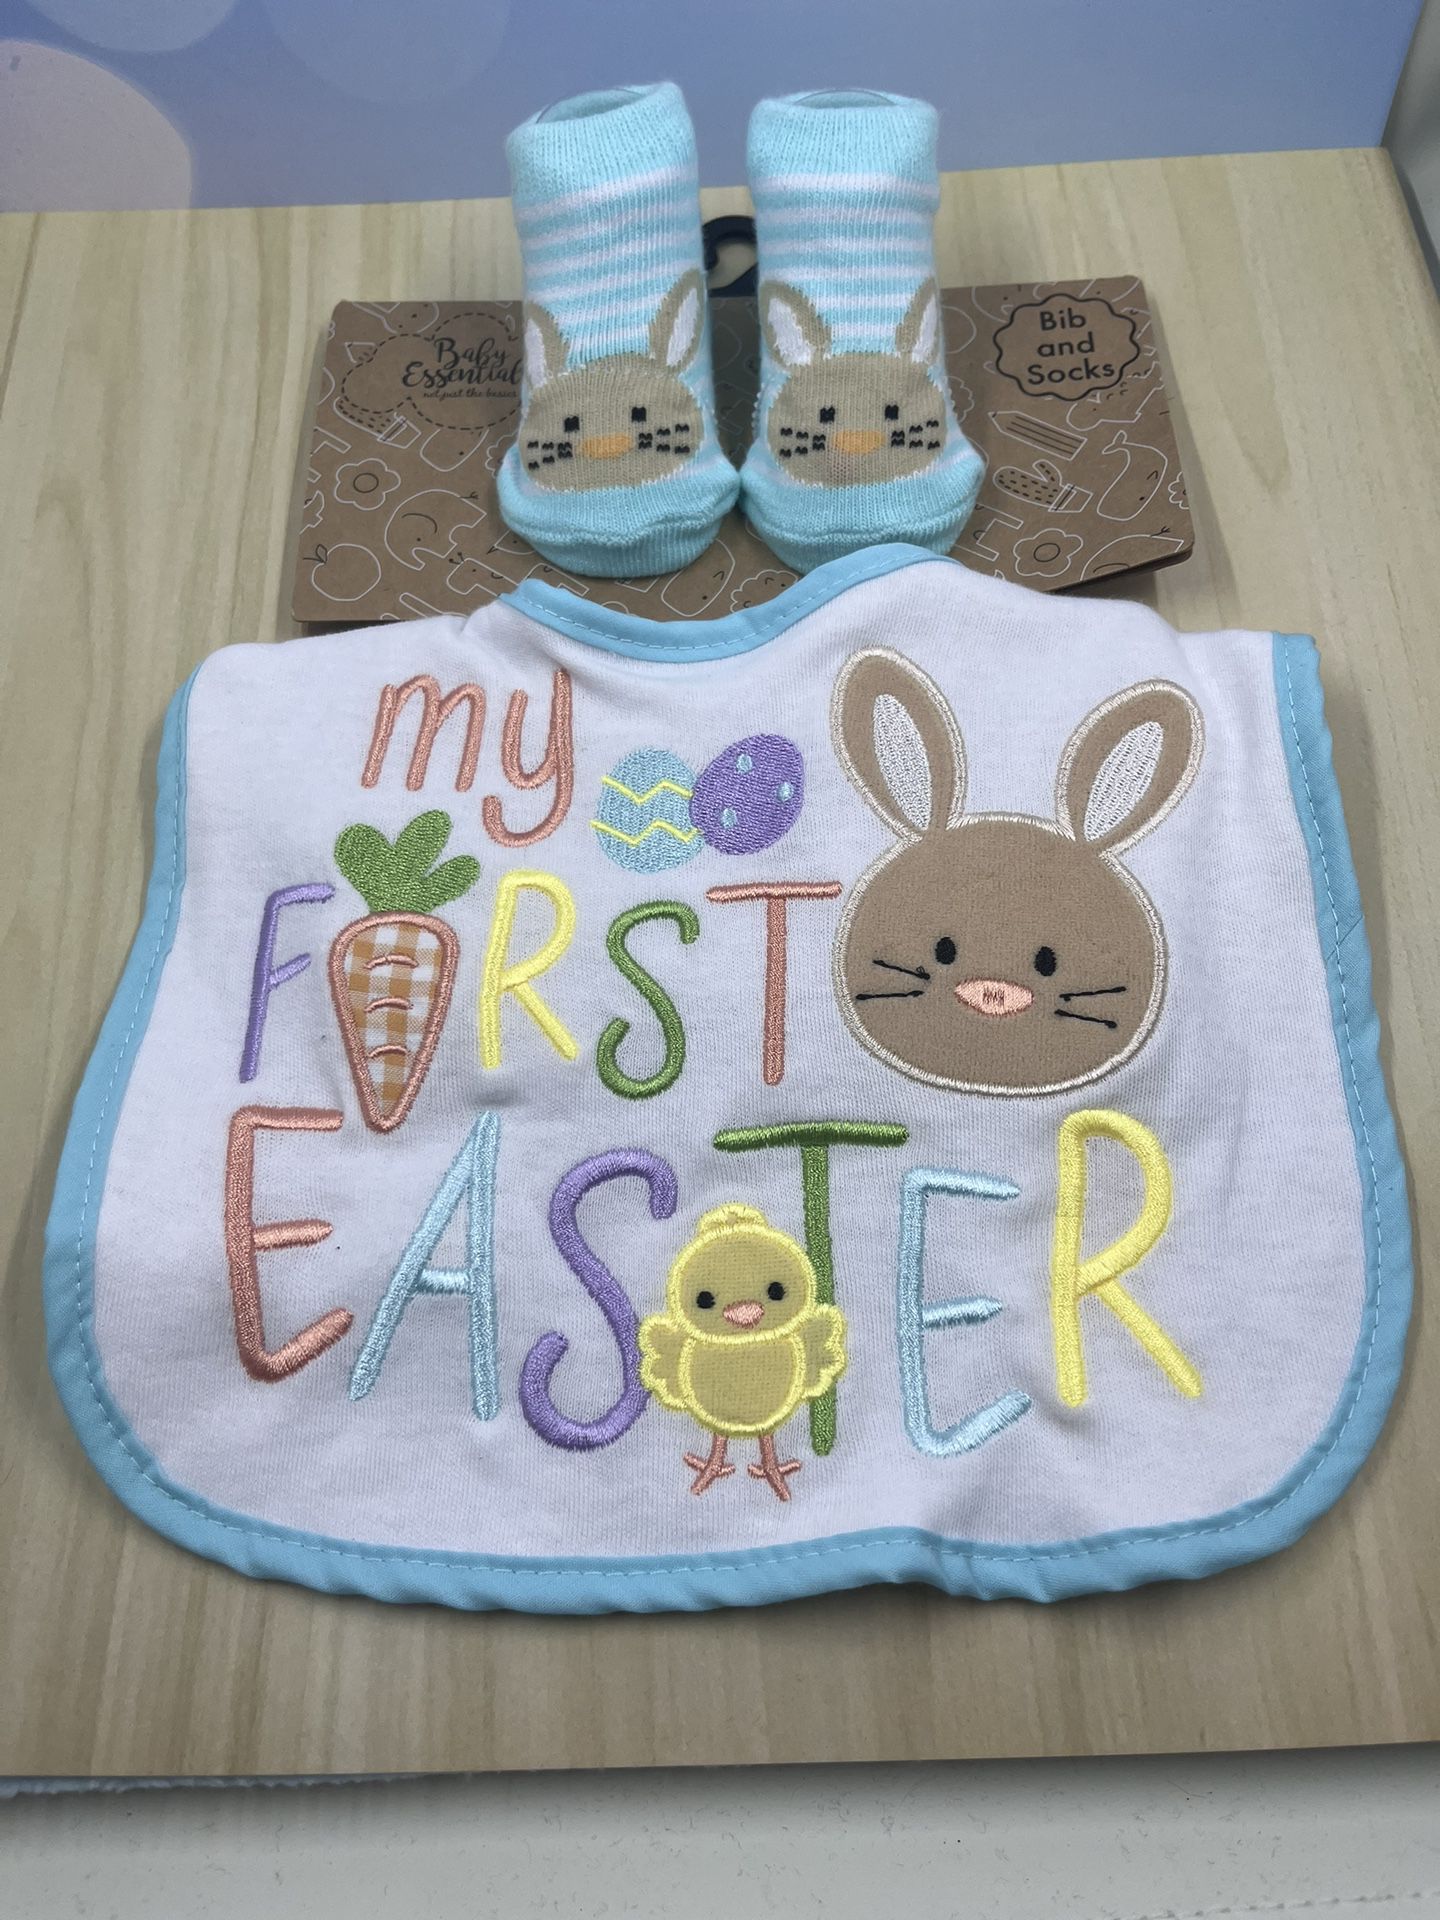 Offers are always welcome! Baby first easter bib and socks